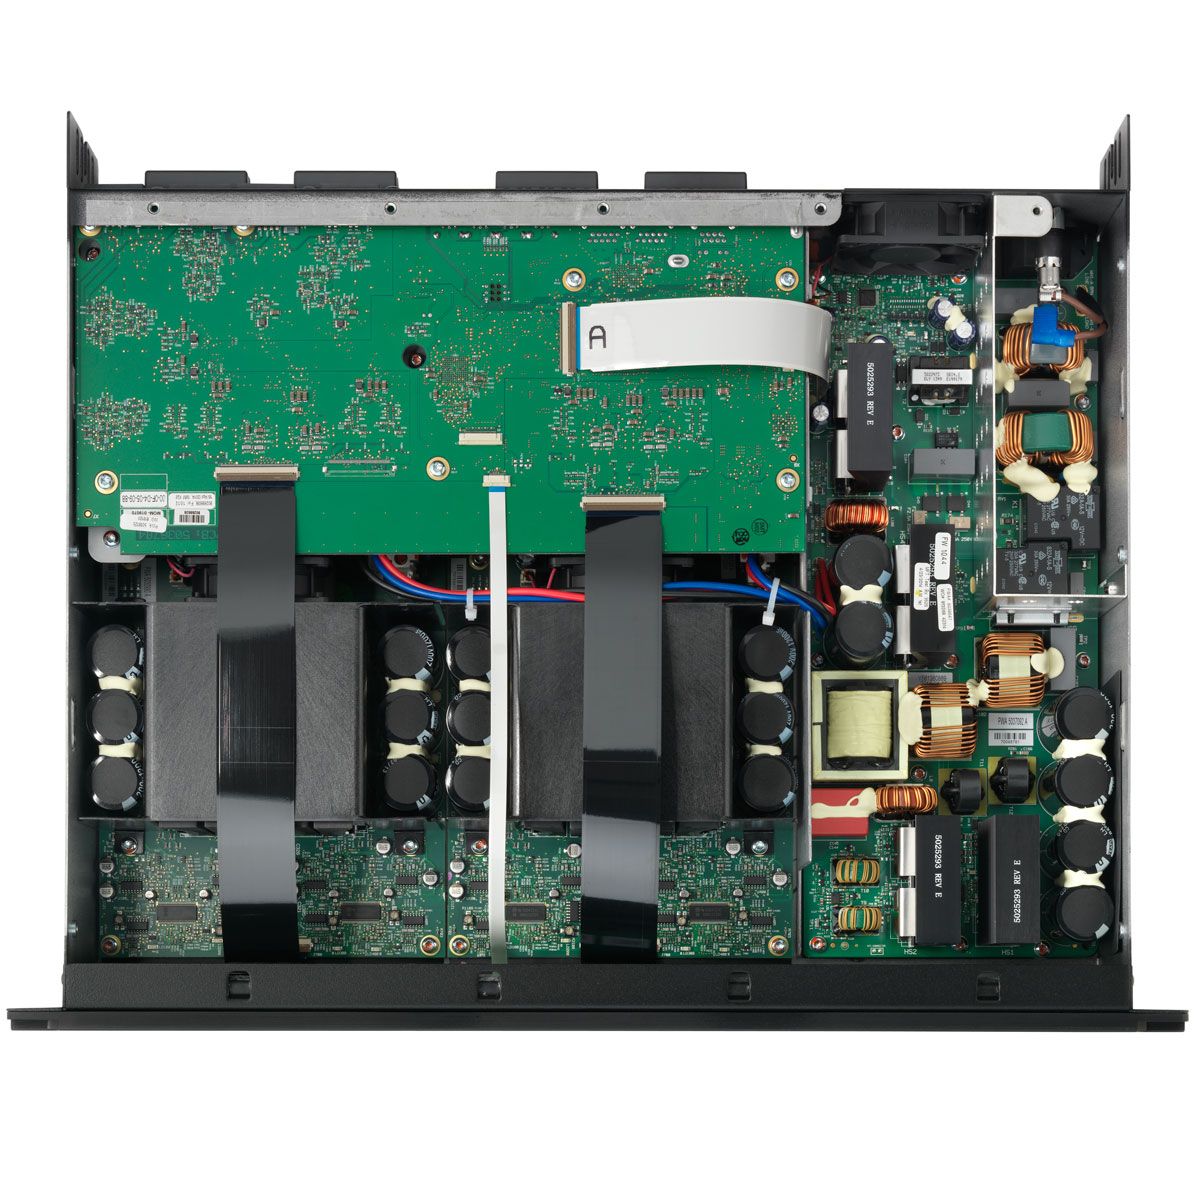 JBL Synthesis SDA 8300 8-Channel Amplifier, Black, top view with internal circuit board